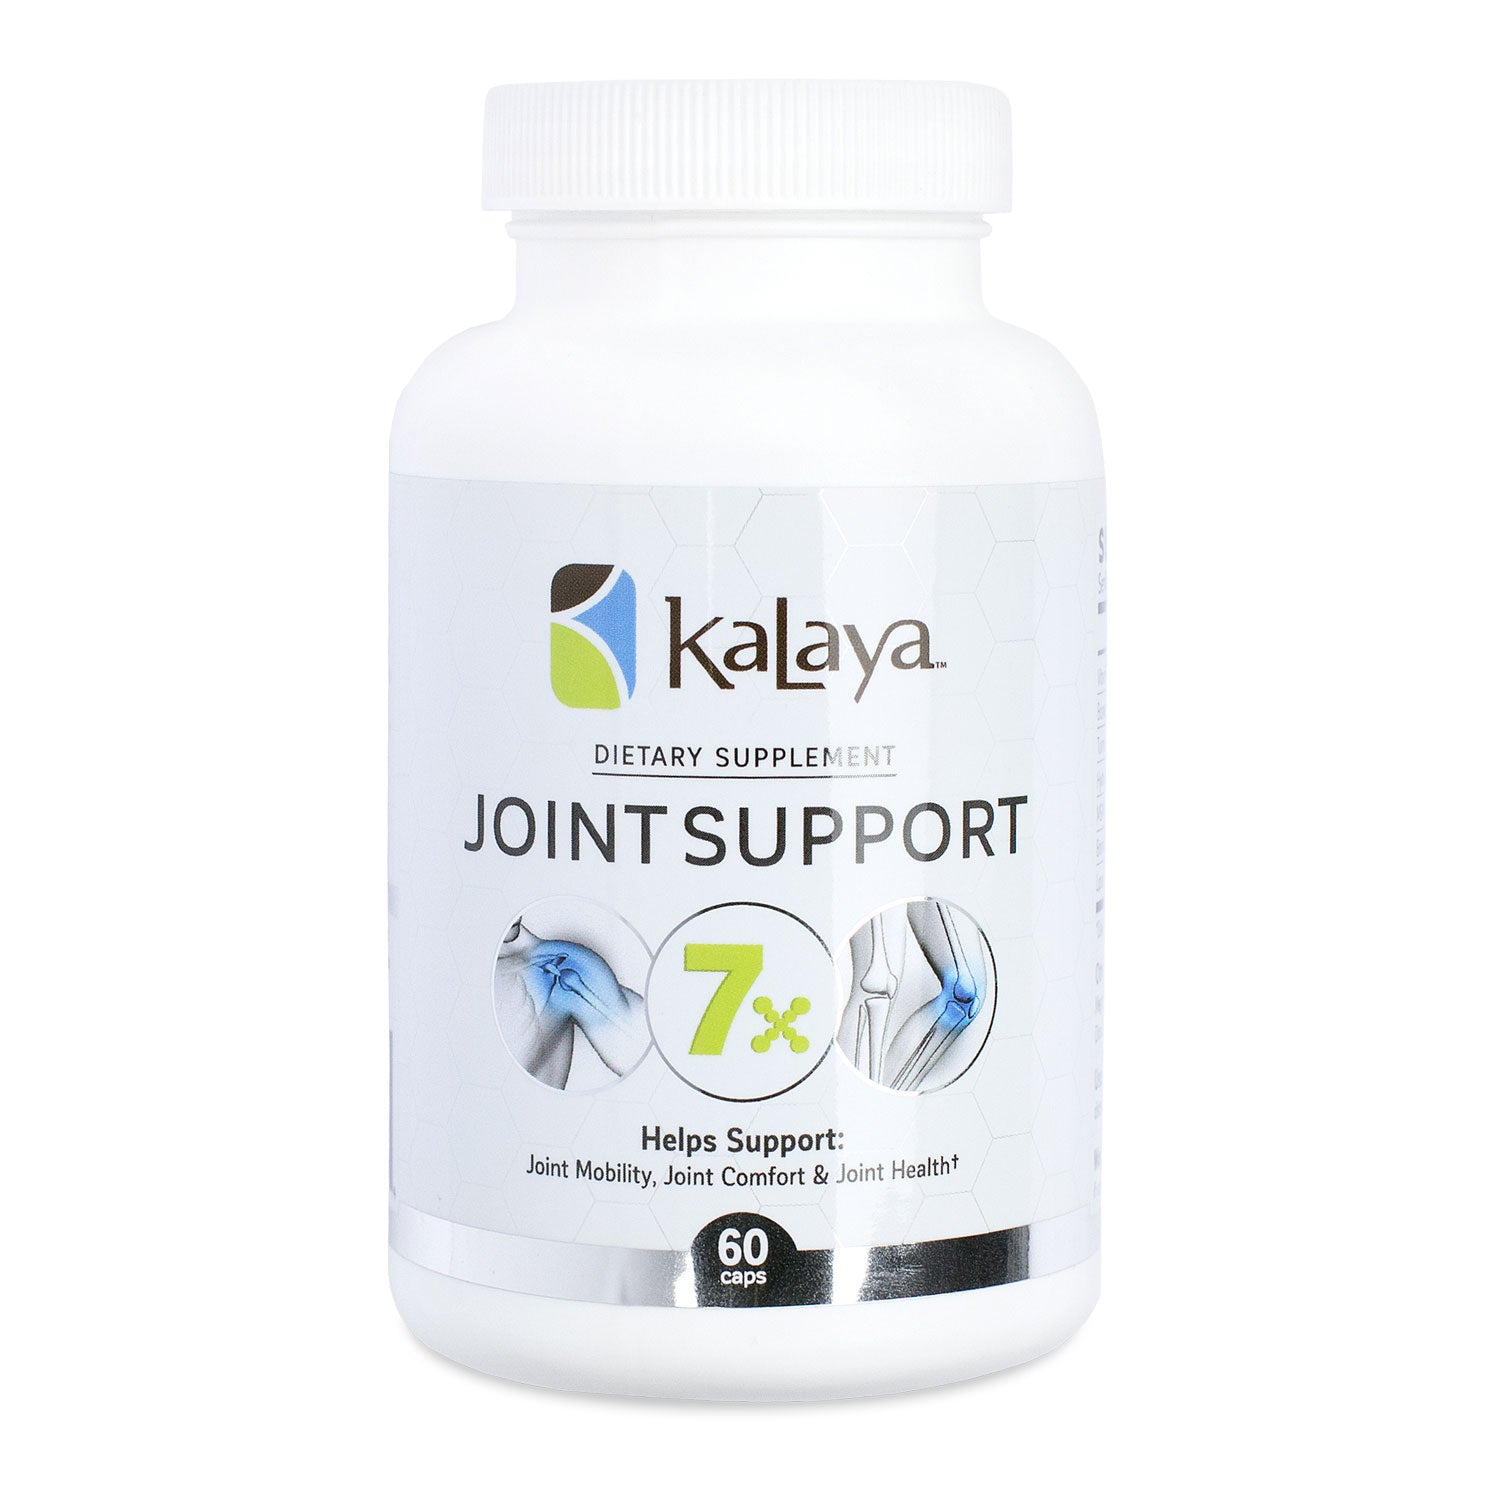 Bottle of Kalaya 7X Joint Support Dietary Supplement to Help Support Joint Mobility, Comfort and Health with 60 Capsules